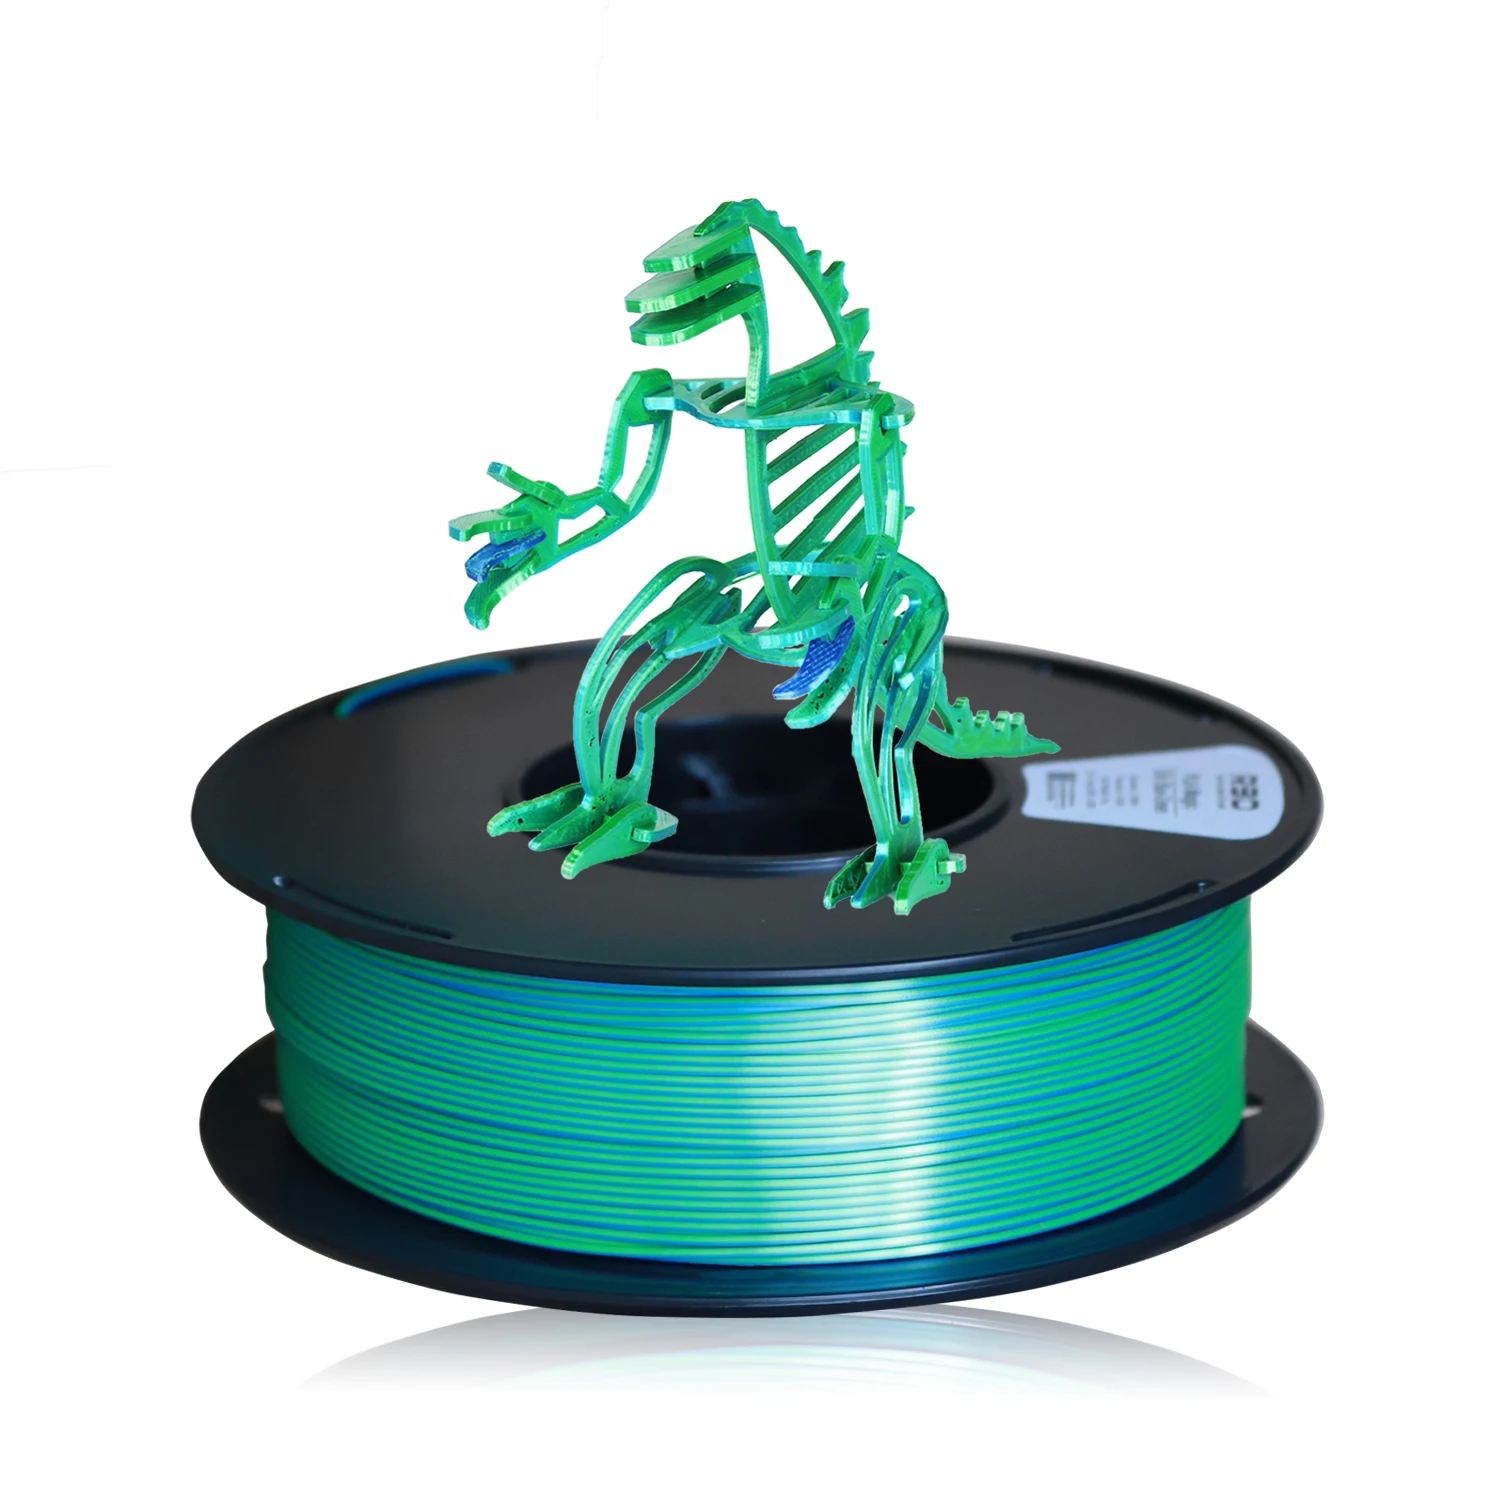 Createbot two-tone1kg filament Dual color  1.75mm 1kg  ±0.02mm A roll of filament comes in two colorsSpool 3D Printing Material polypropylene 3d printer filament 3D Printing Materials